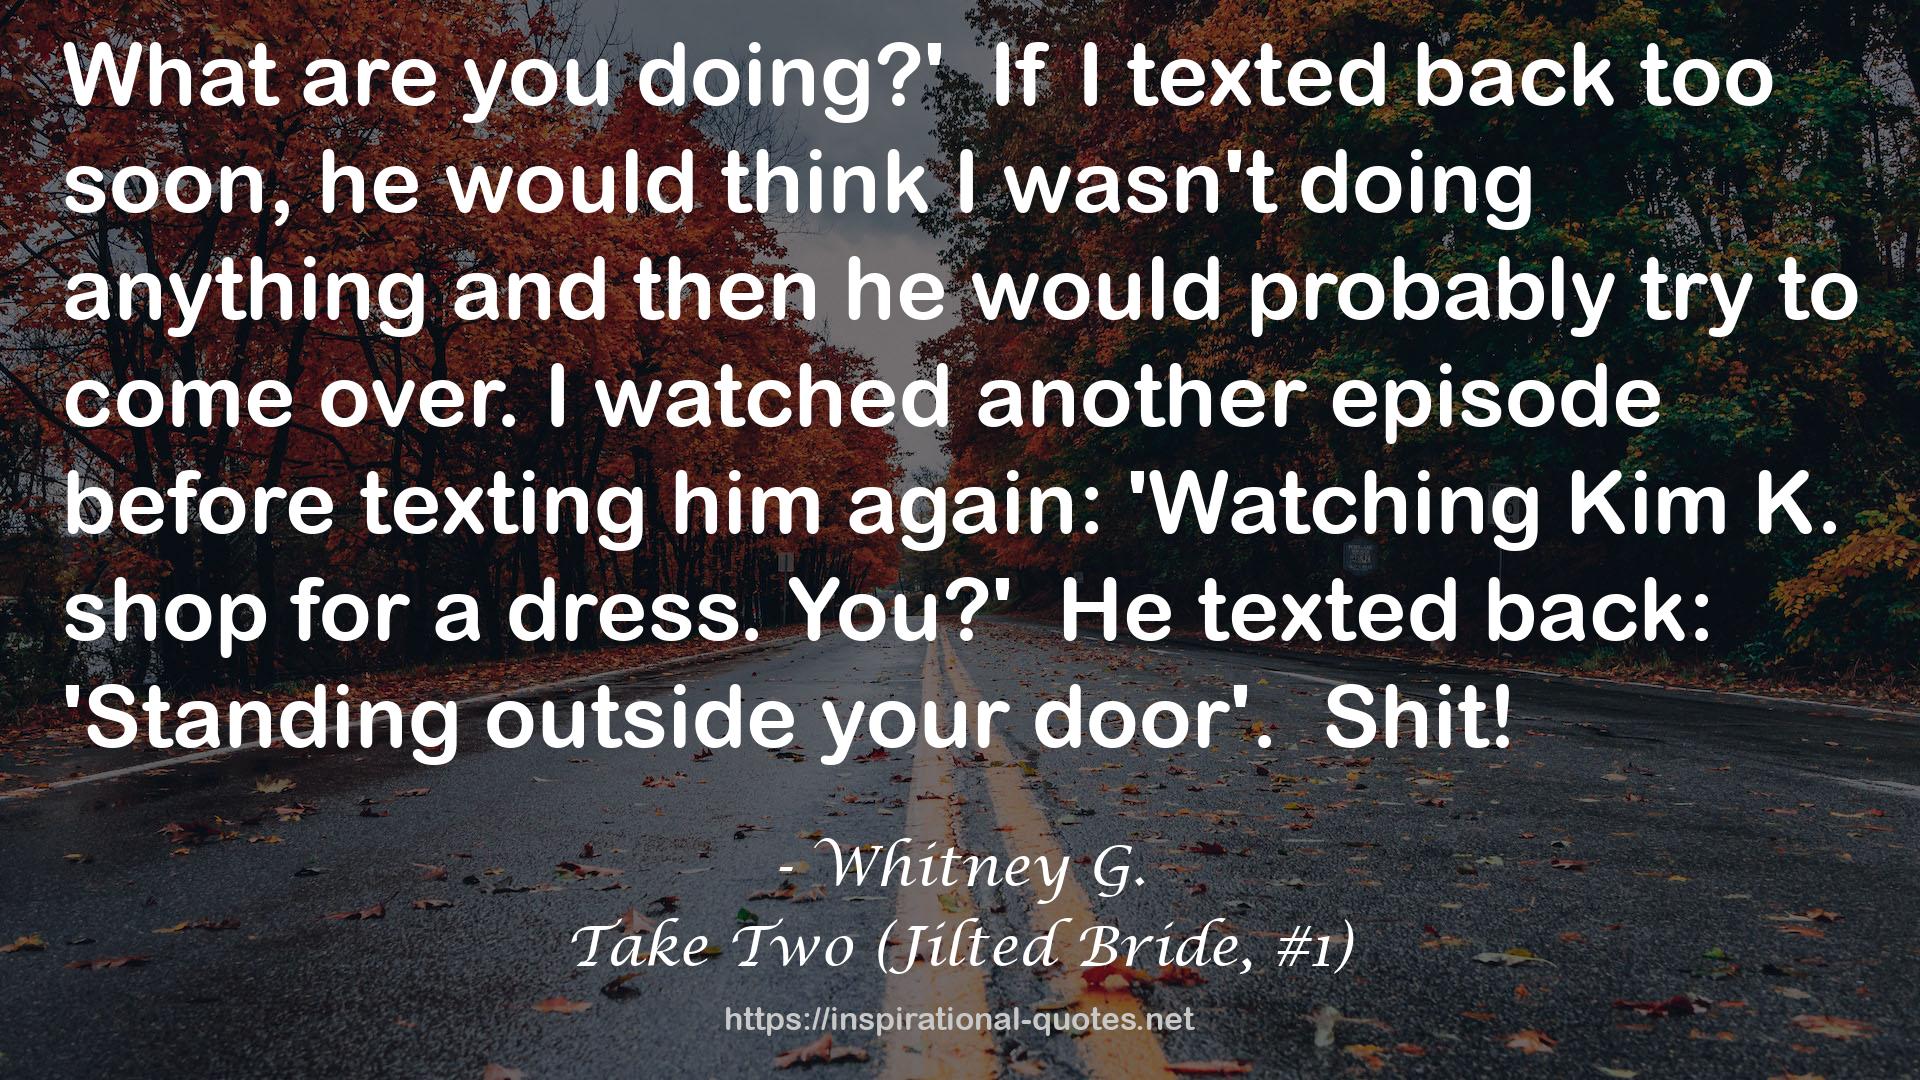 Take Two (Jilted Bride, #1) QUOTES